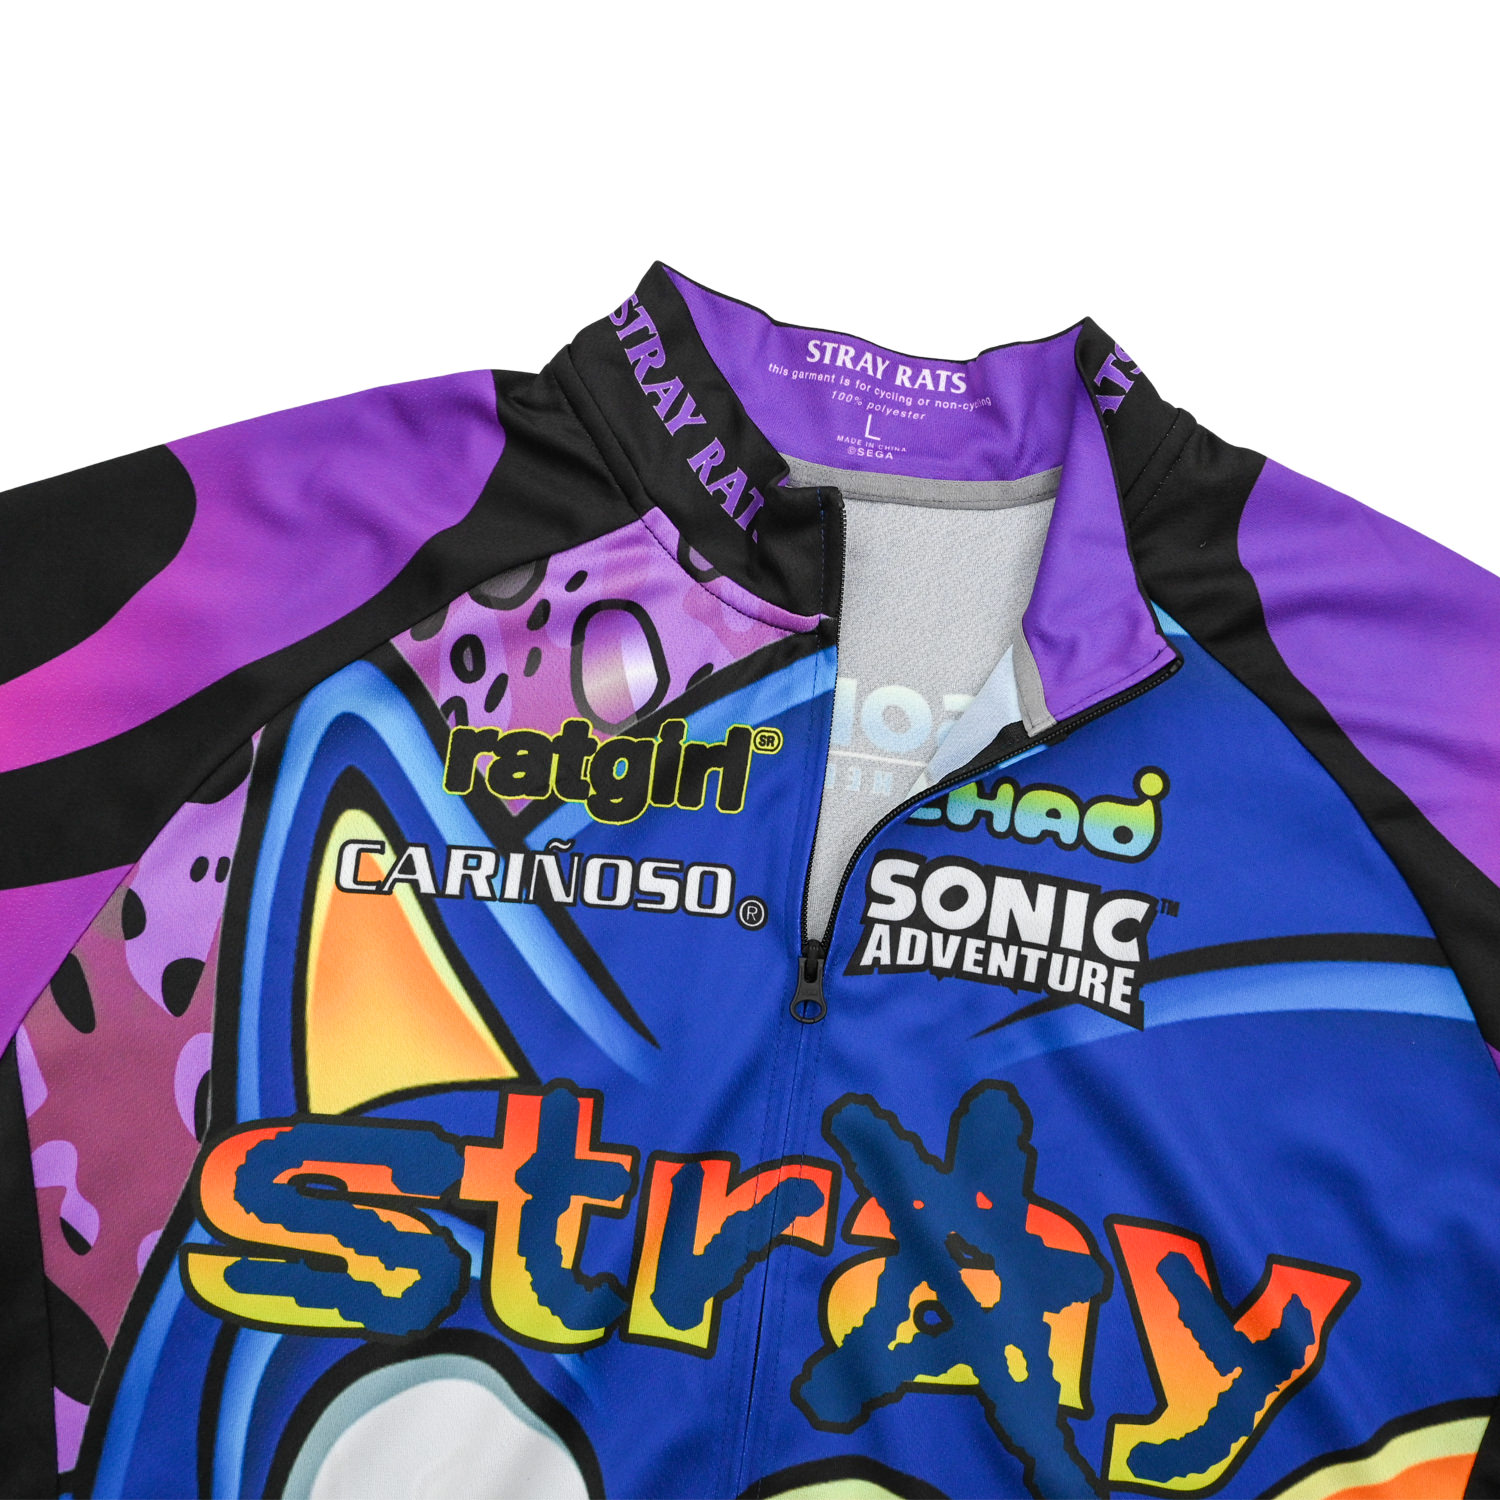 STRAY RATS × SONIC THE HEDGEHOG (SONIC ADVENTURE CYCLING JERSEY ...